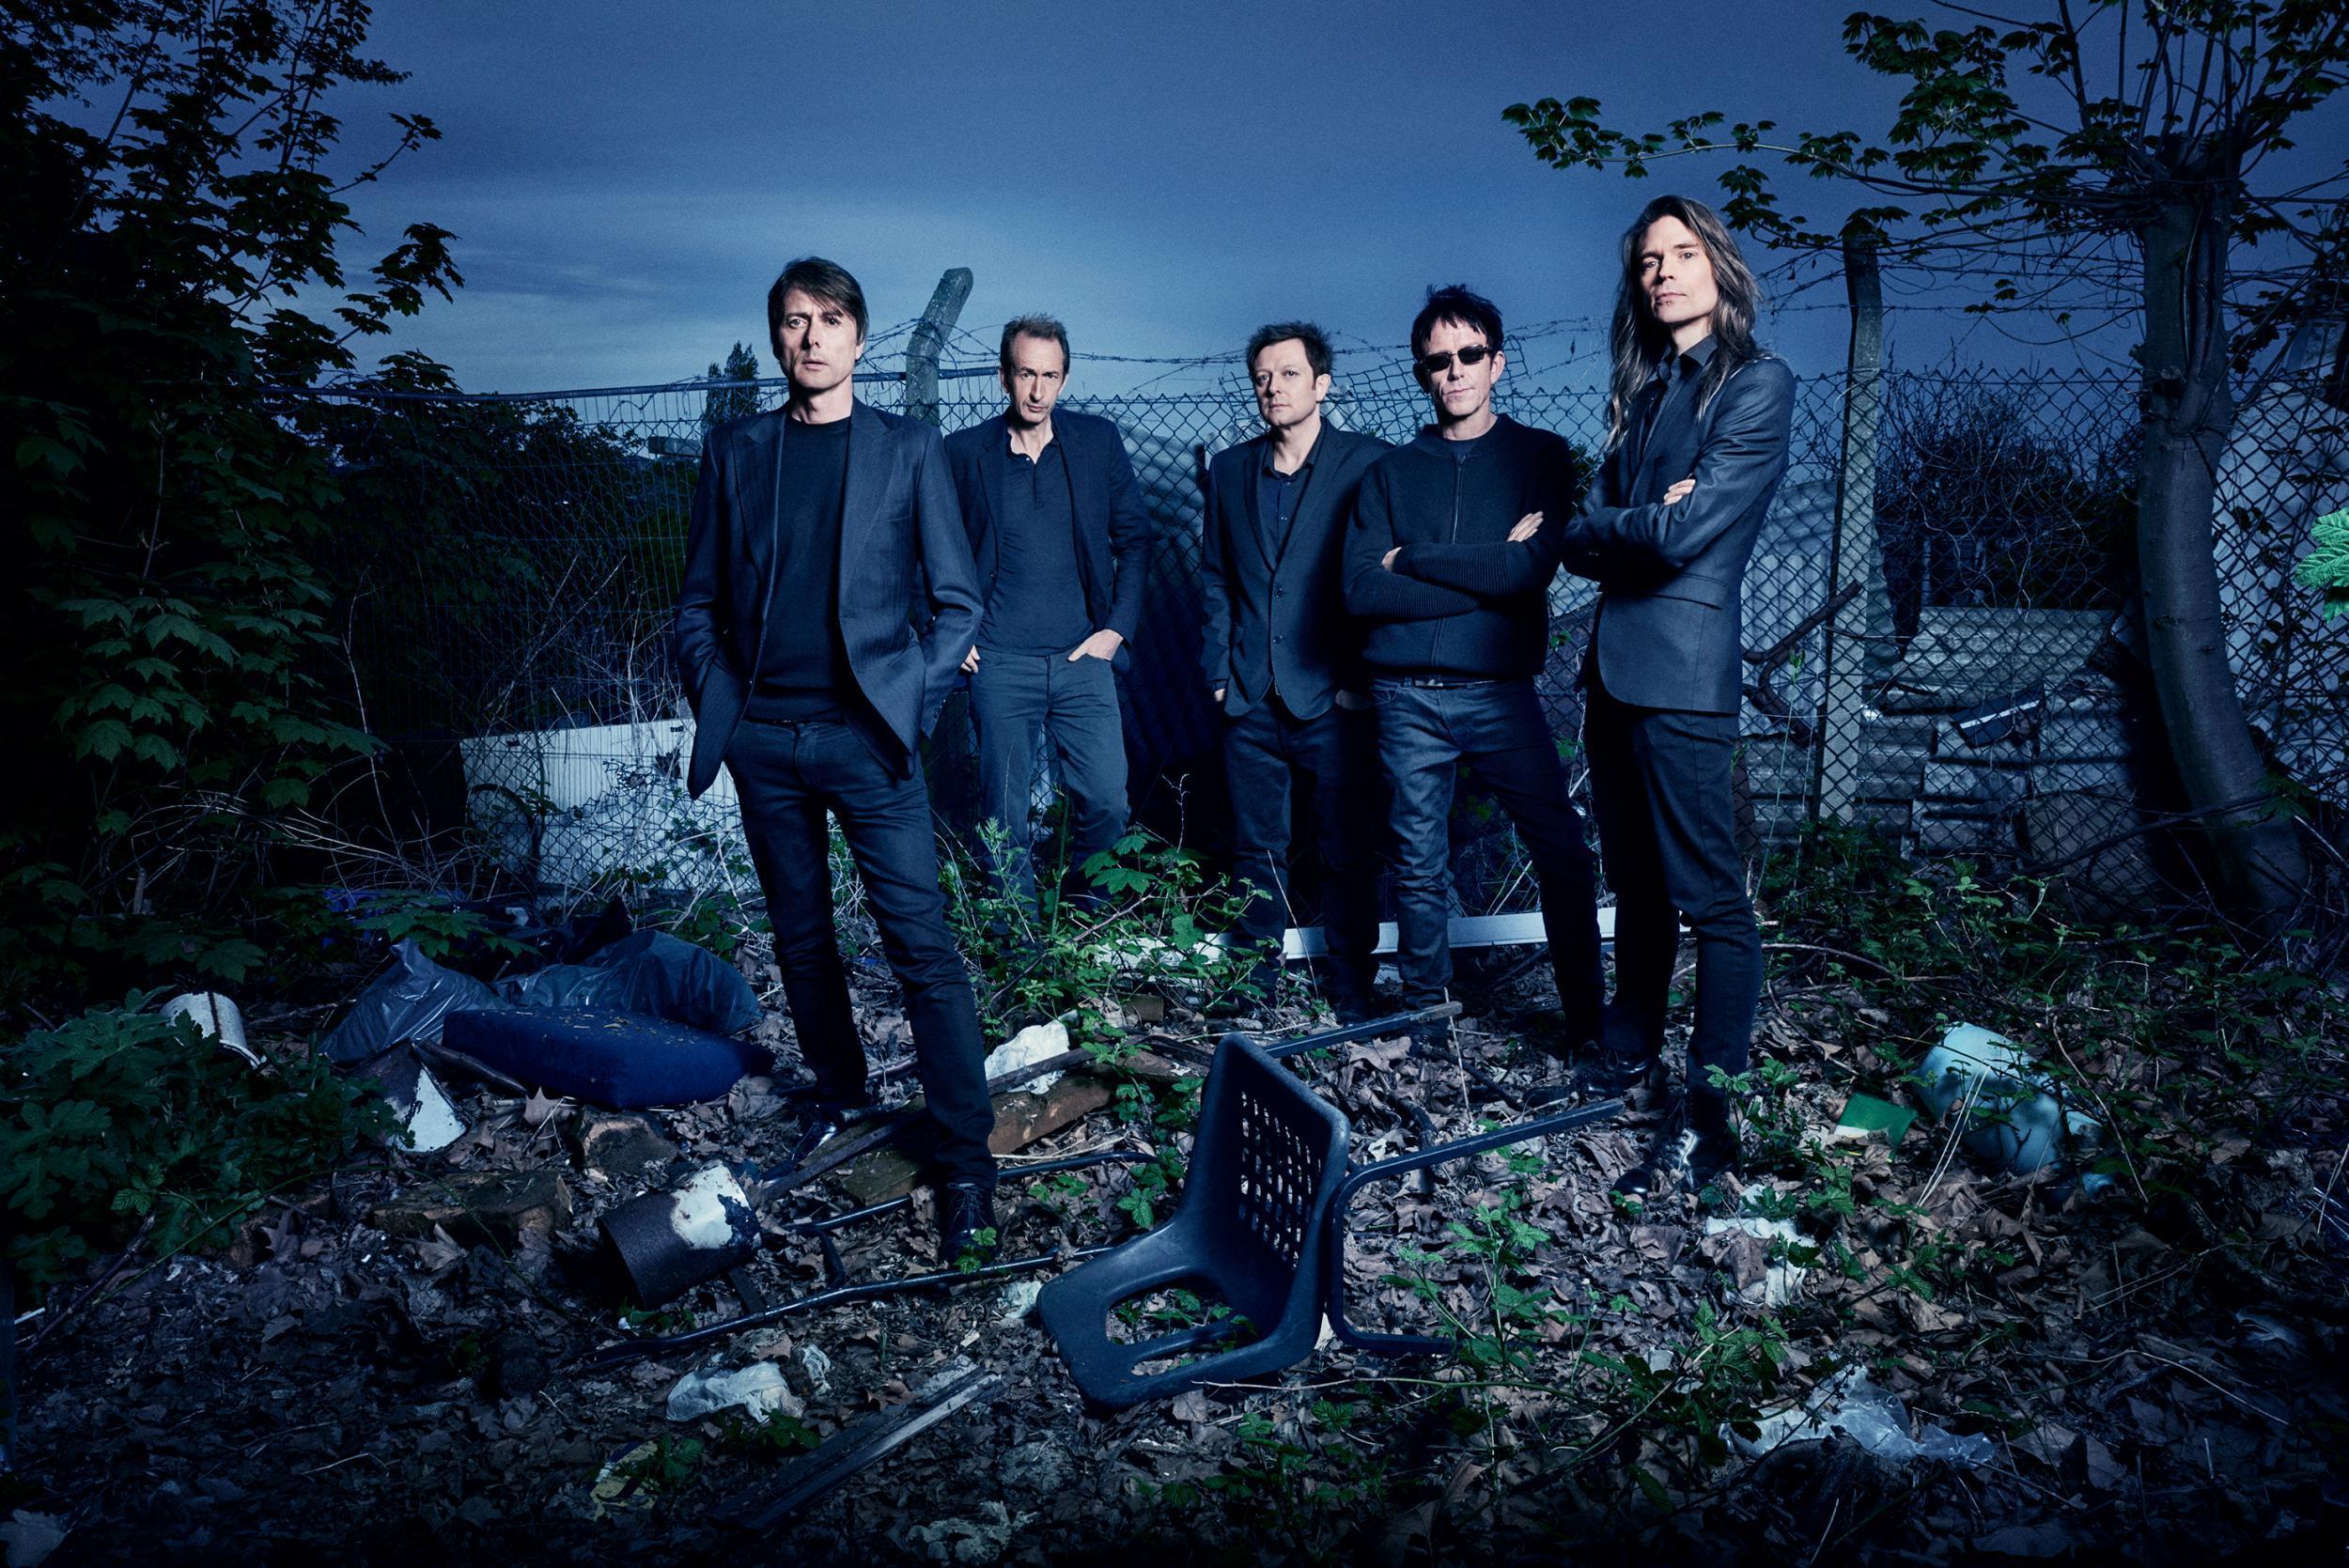 'The story of every band is the same' – Suede: Brett Anderson, Mat Osman, Richard Oakes, Simon Gilbert, Neil Codling